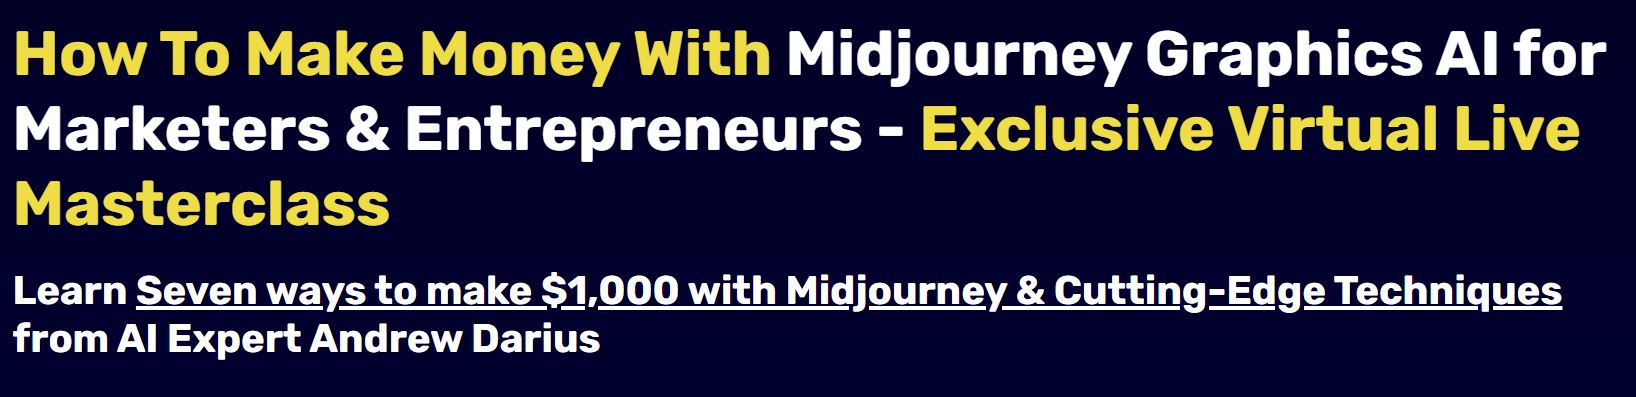 HOW TO MAKE MONEY WITH MIDJOURNEY GRAPHICS AI - MIDJOURNEY FOR GRAPHIC DESIGNERS AND ENTERPRENEURS